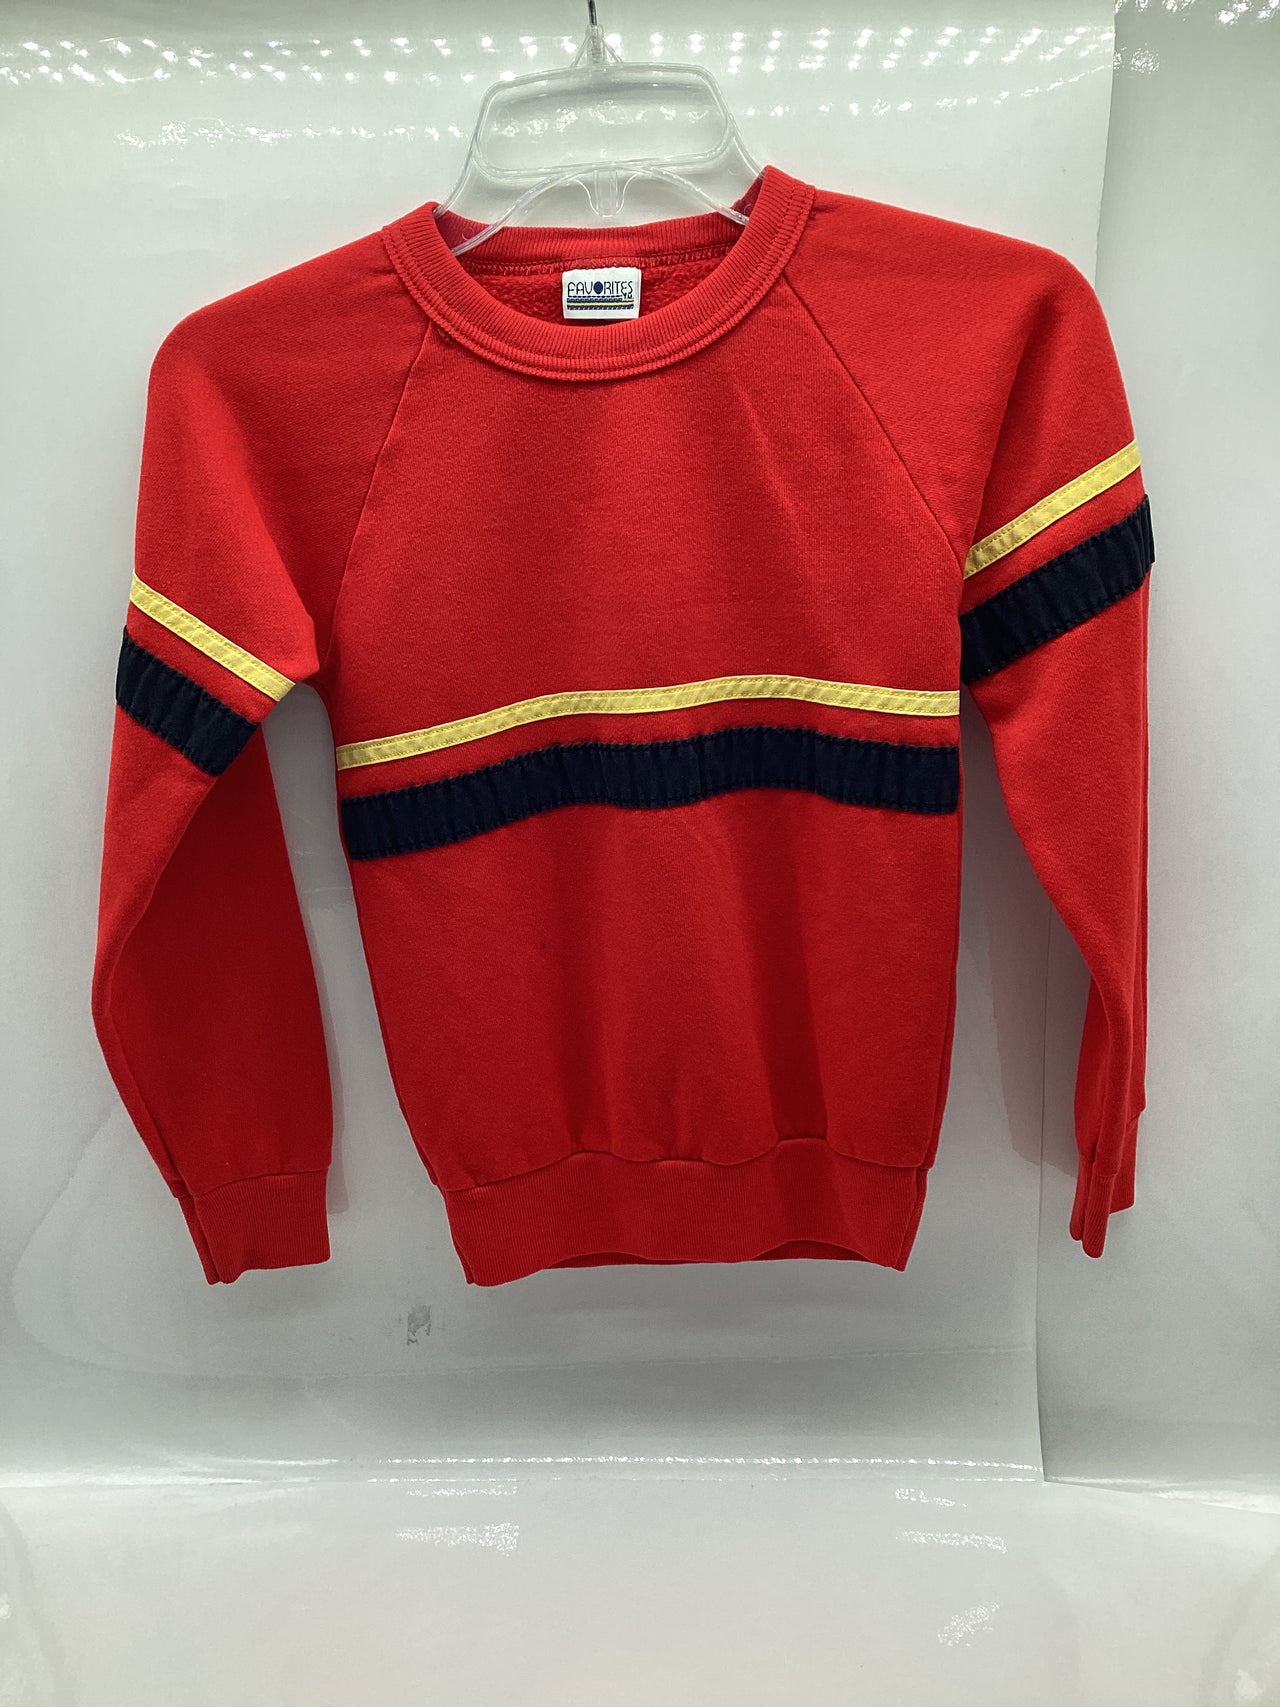 Apple Vintage - Apparel - Red Sweater w/ yellow and black stripes